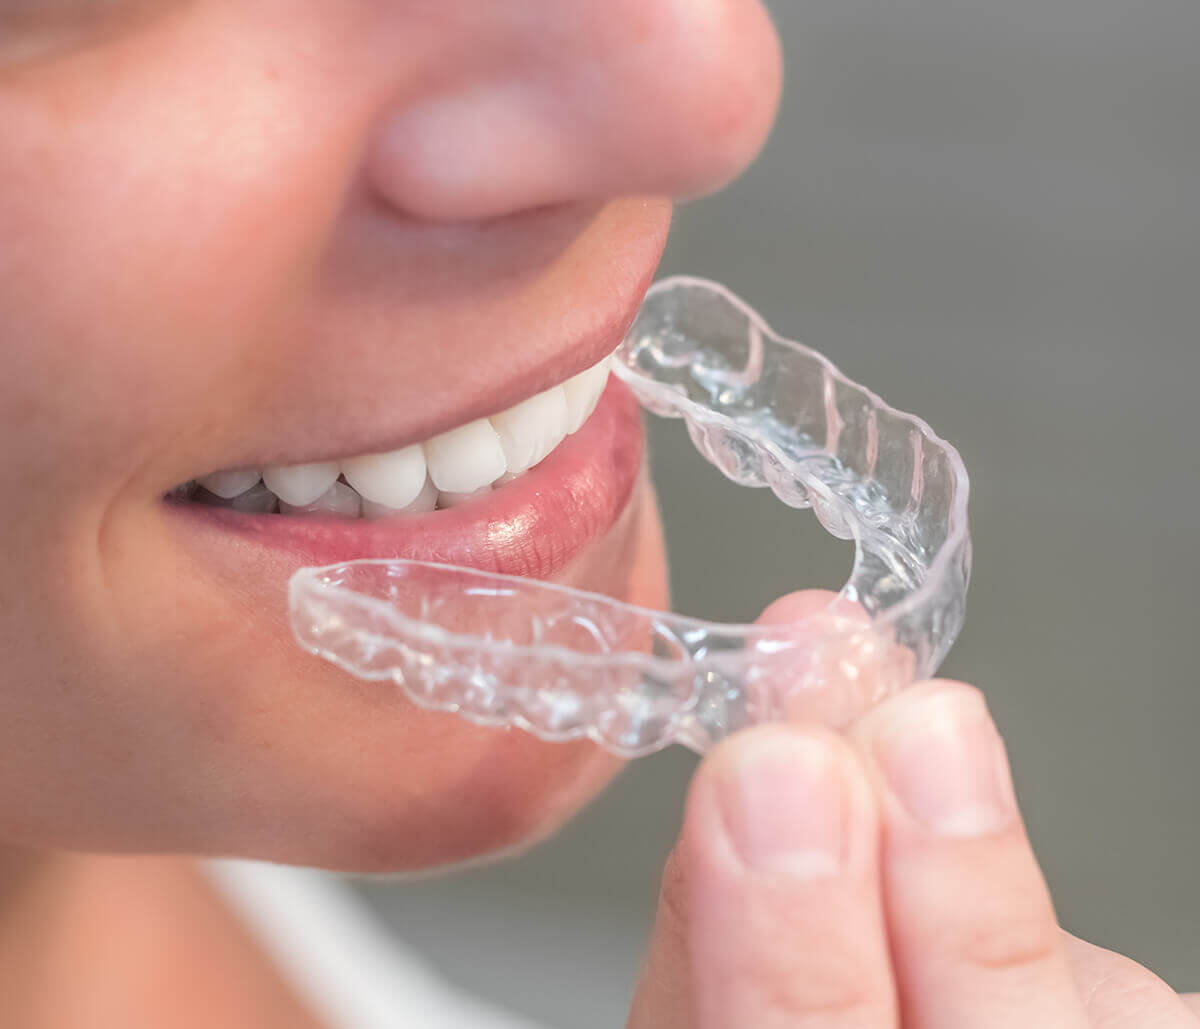 Overcome teeth clenching and grinding with Dental Bite Guards for bruxism